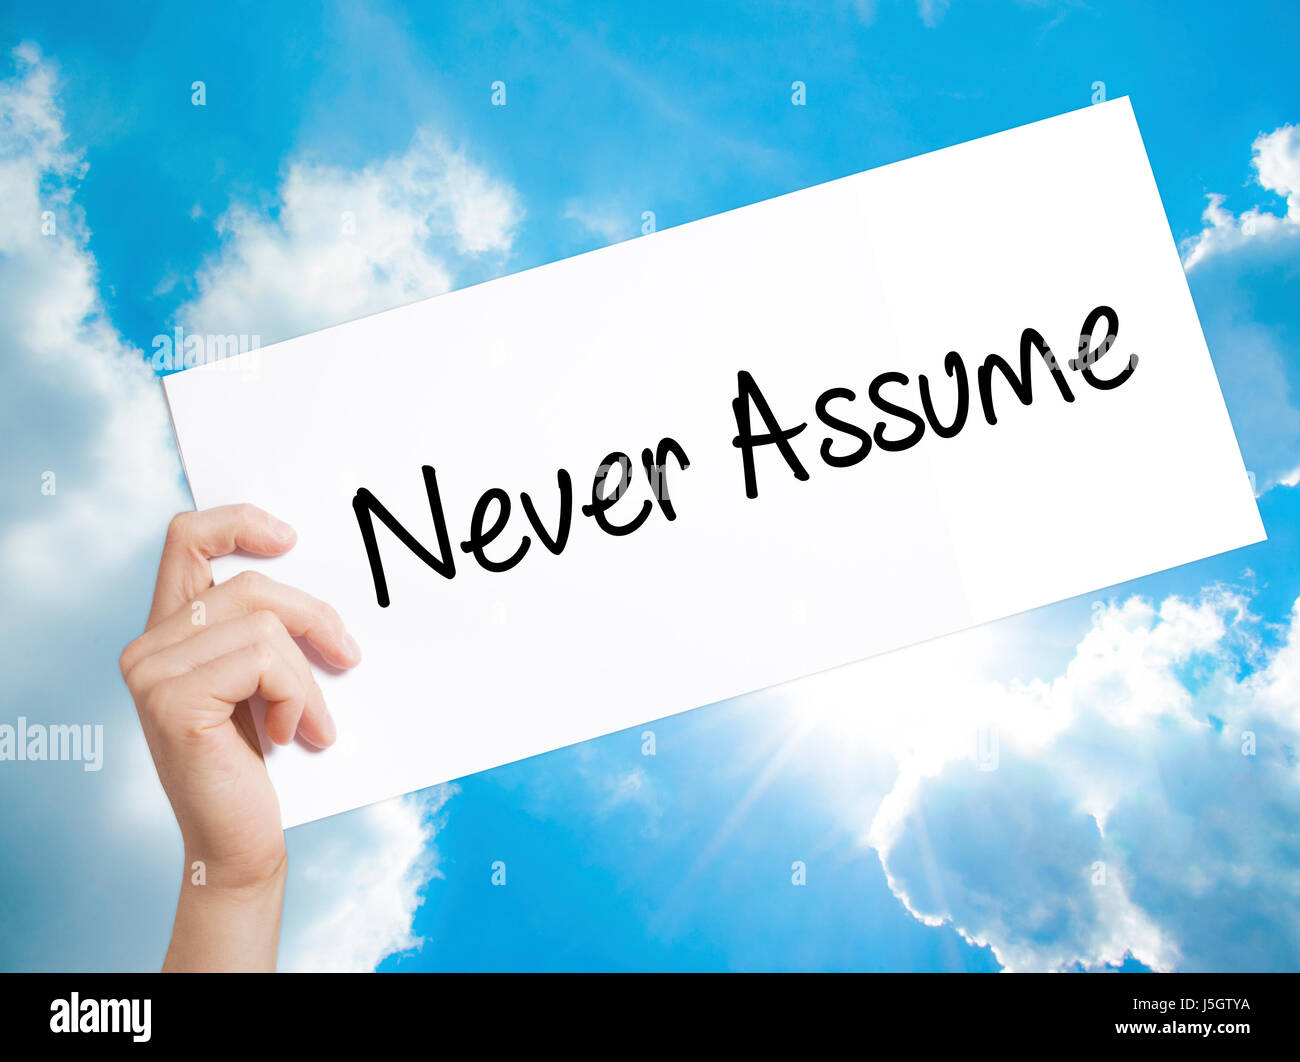 Never Assume Sign on white paper. Man Hand Holding Paper with text. Isolated on sky background.  Business concept. Stock Photo Stock Photo